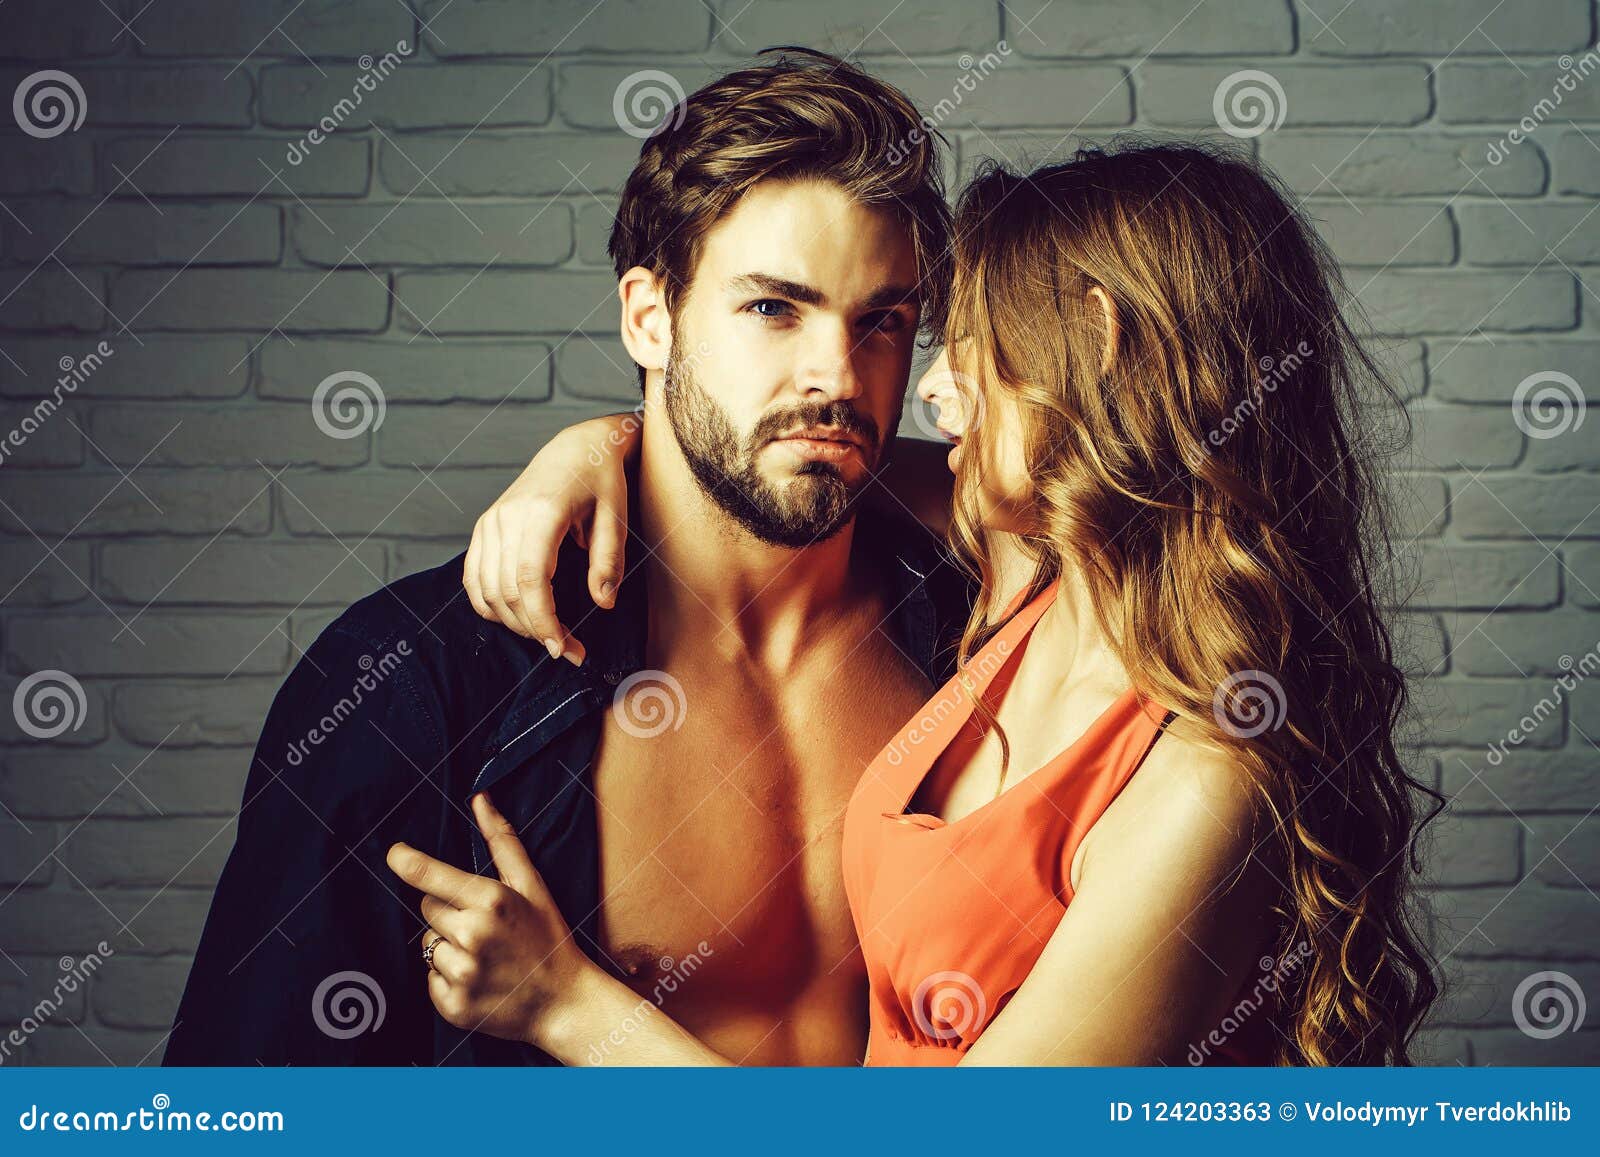 Couple Of Lovers Stock Image Image Of Muscular Orange 124203363 